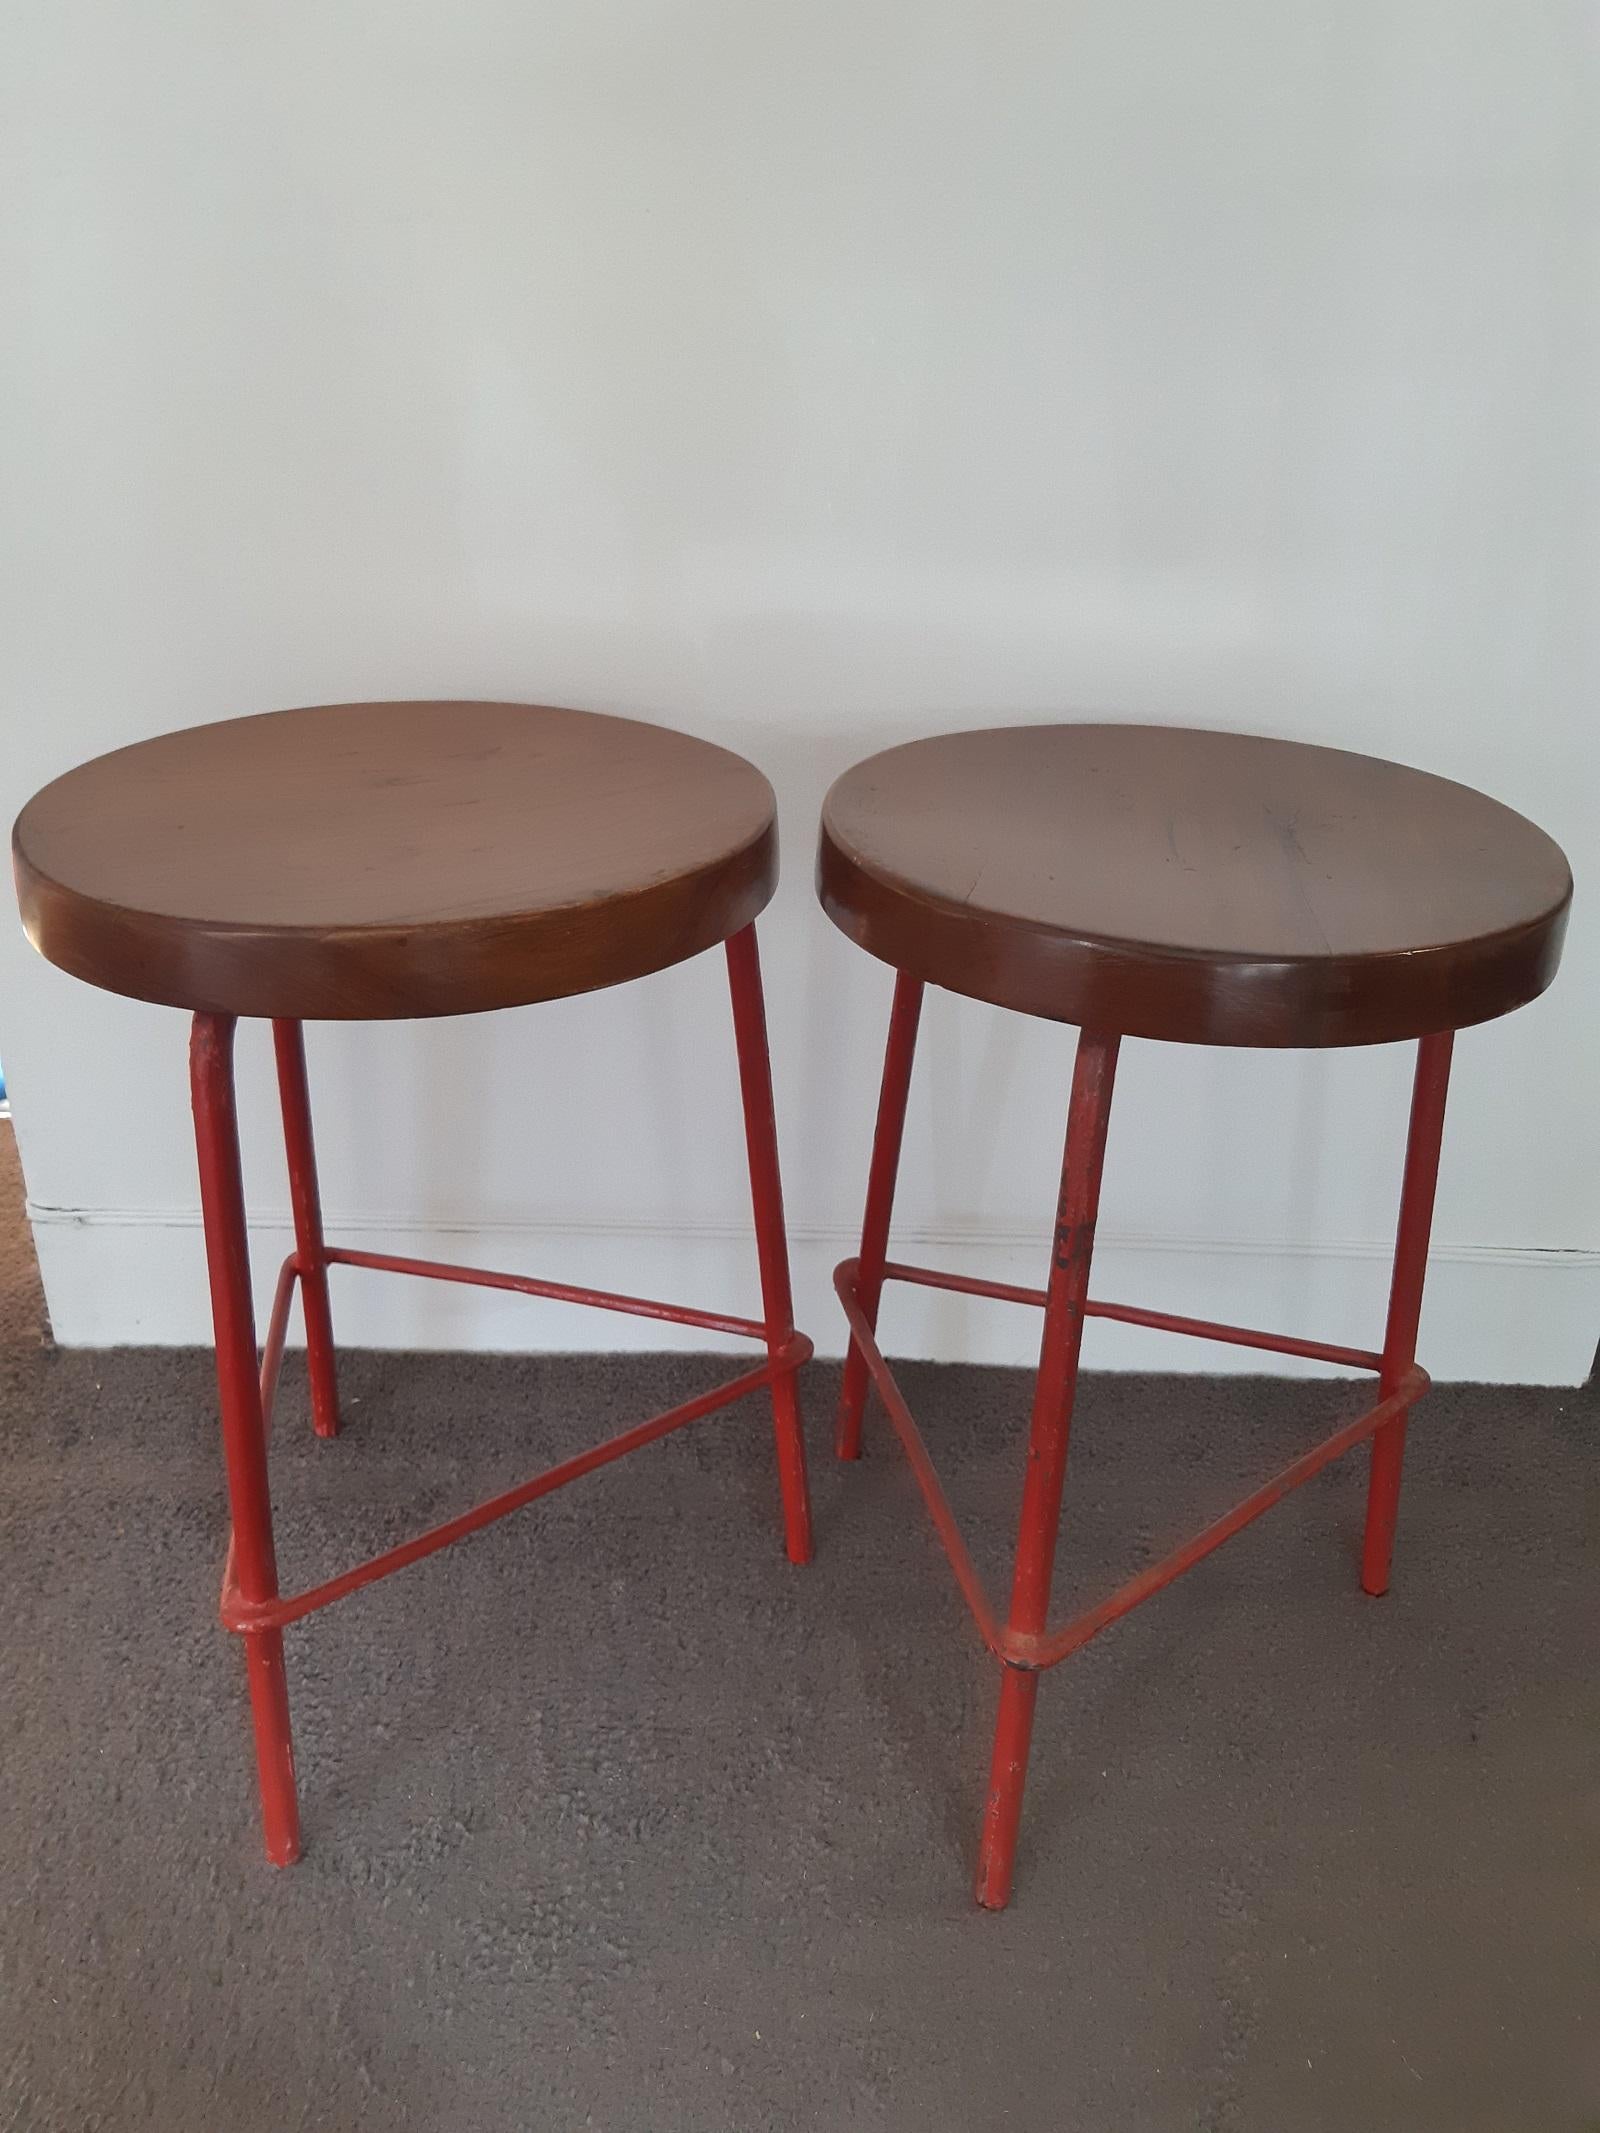 Indian Pair of Pierre Jeanneret Stools, 1960s, Chandigarh